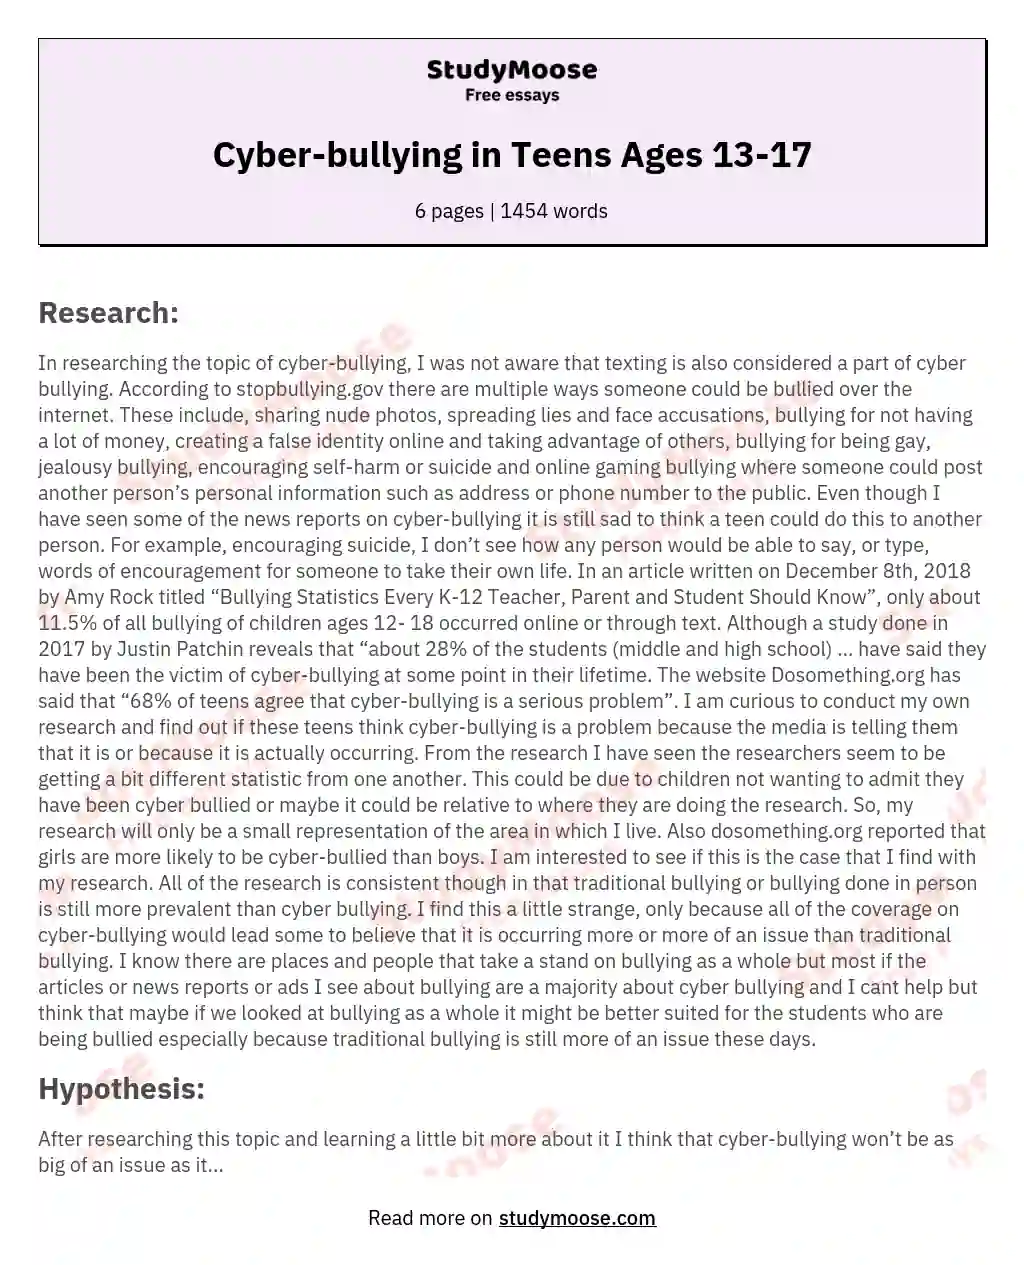 Cyber-bullying in Teens Ages 13-17